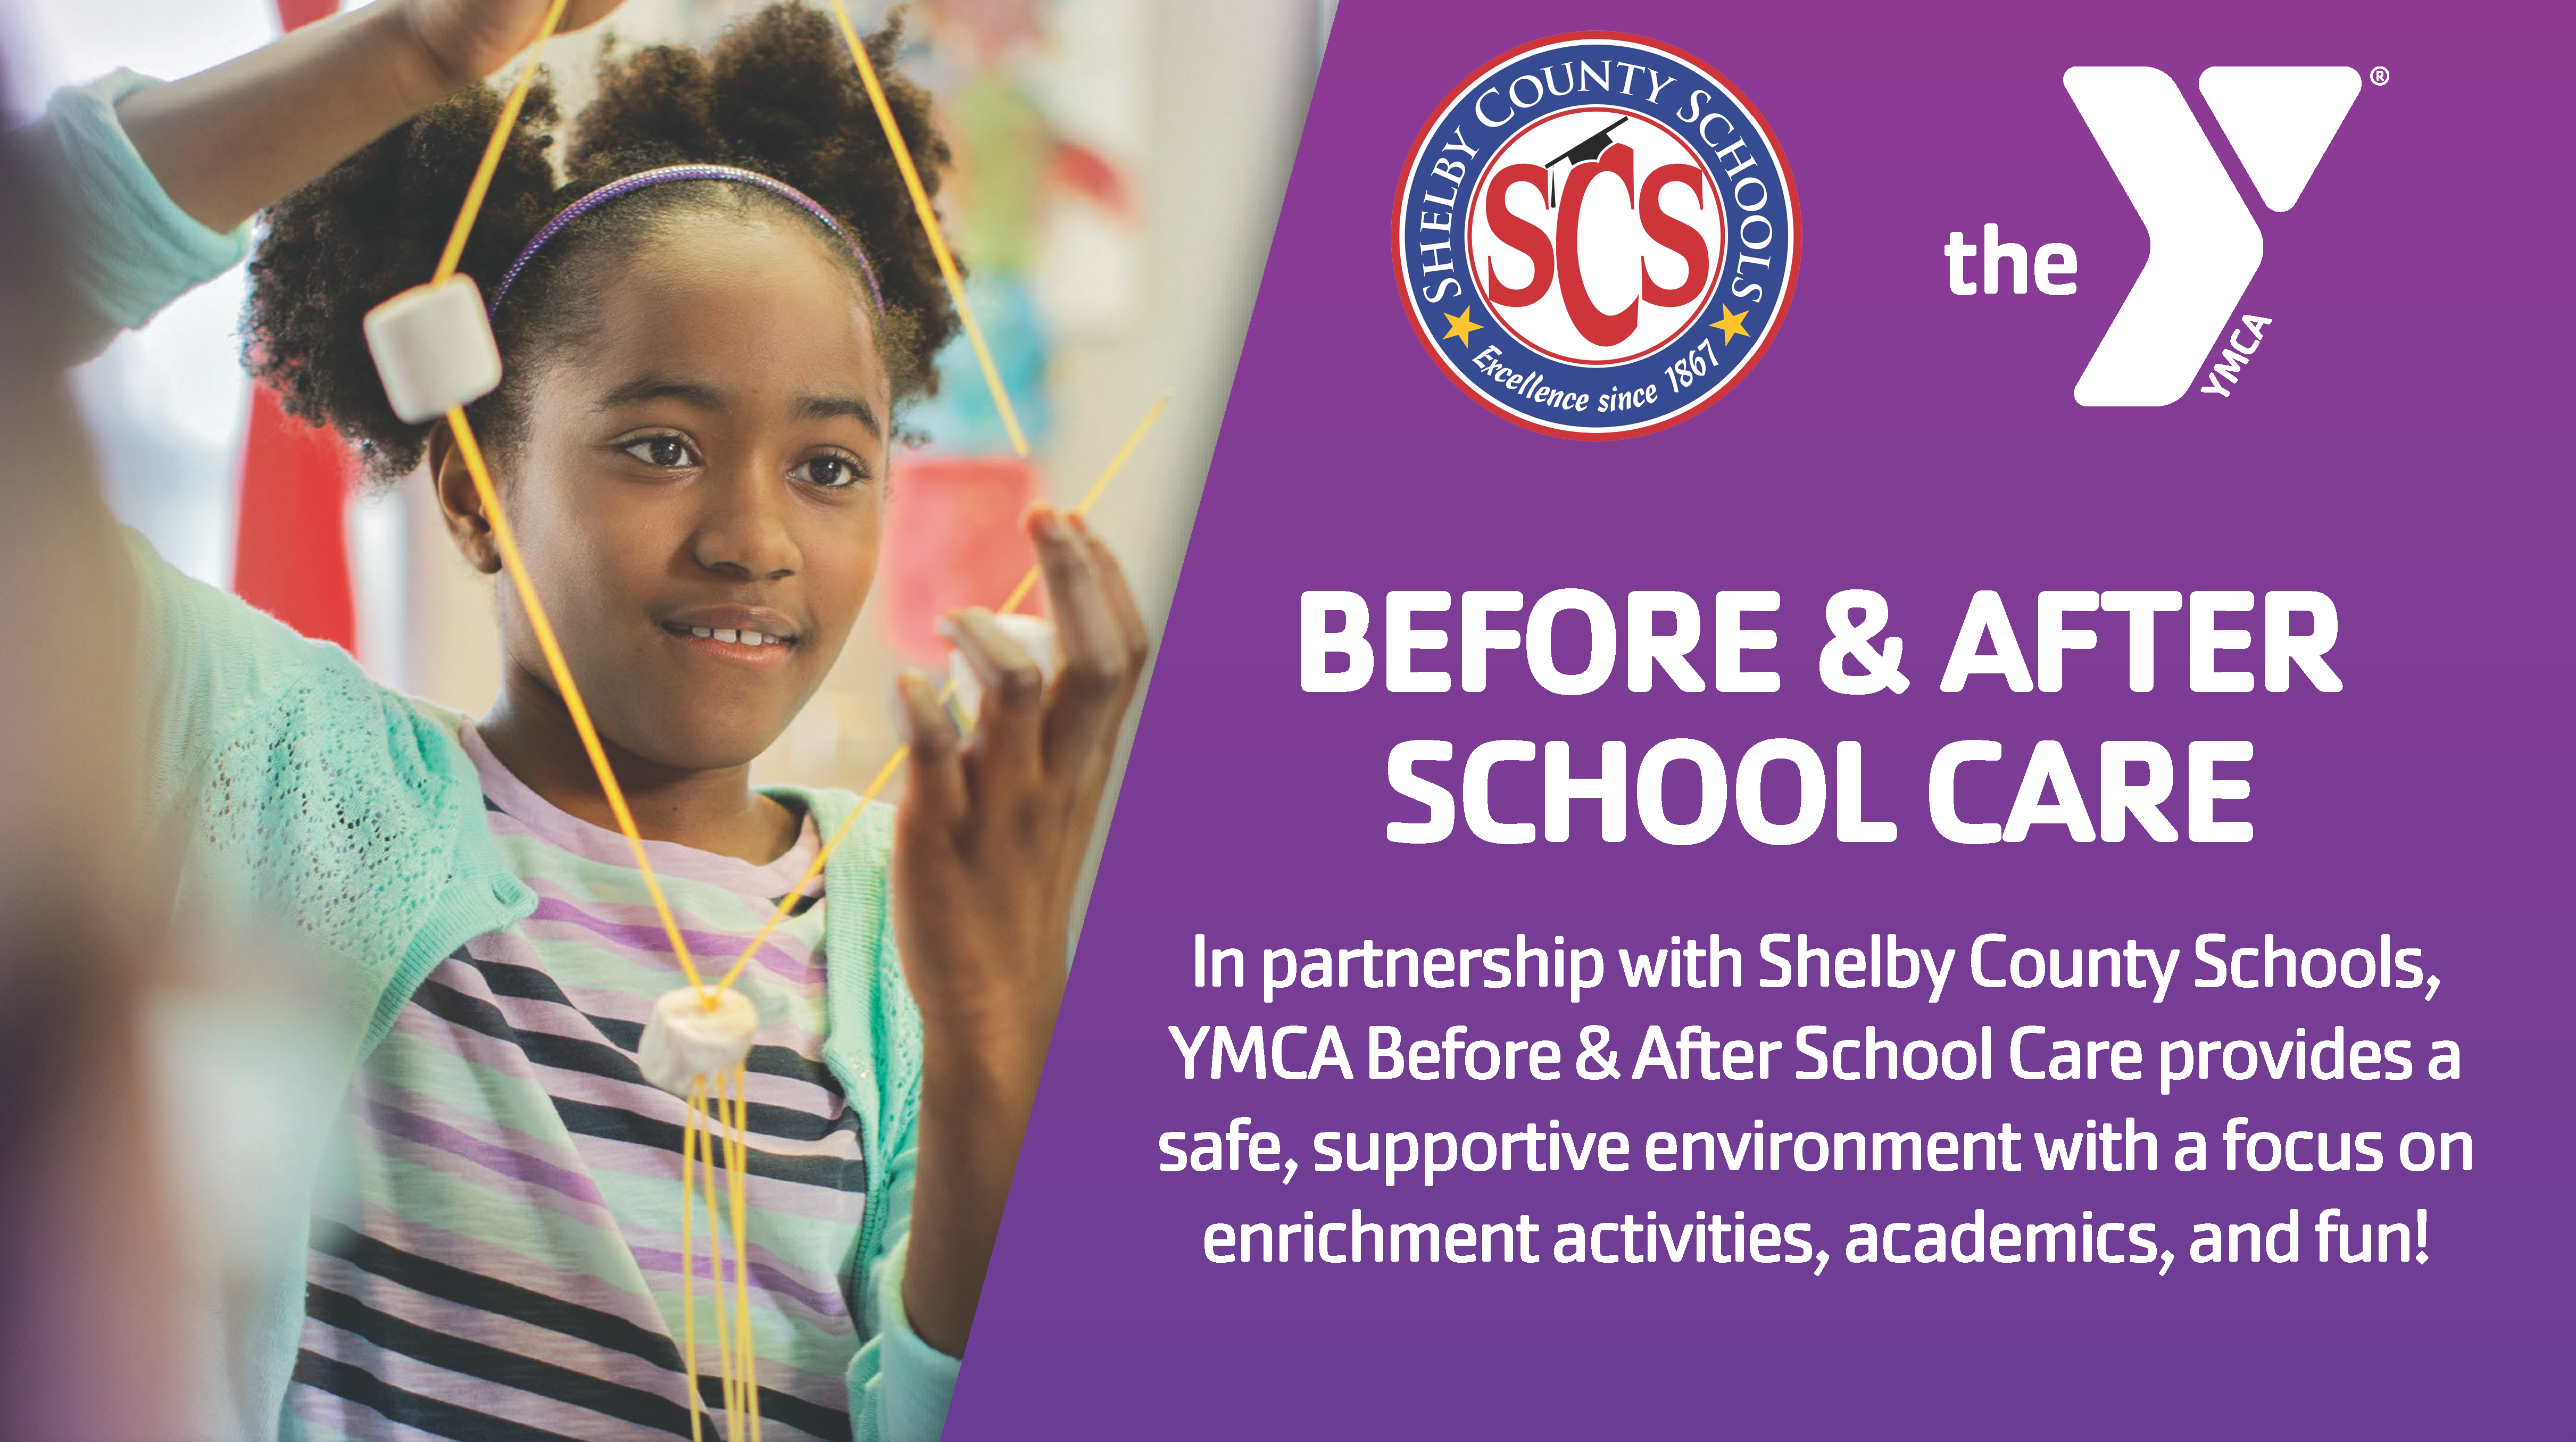 SHELBY COUNTY SCHOOLS BEFORE & AFTER SCHOOL CARE